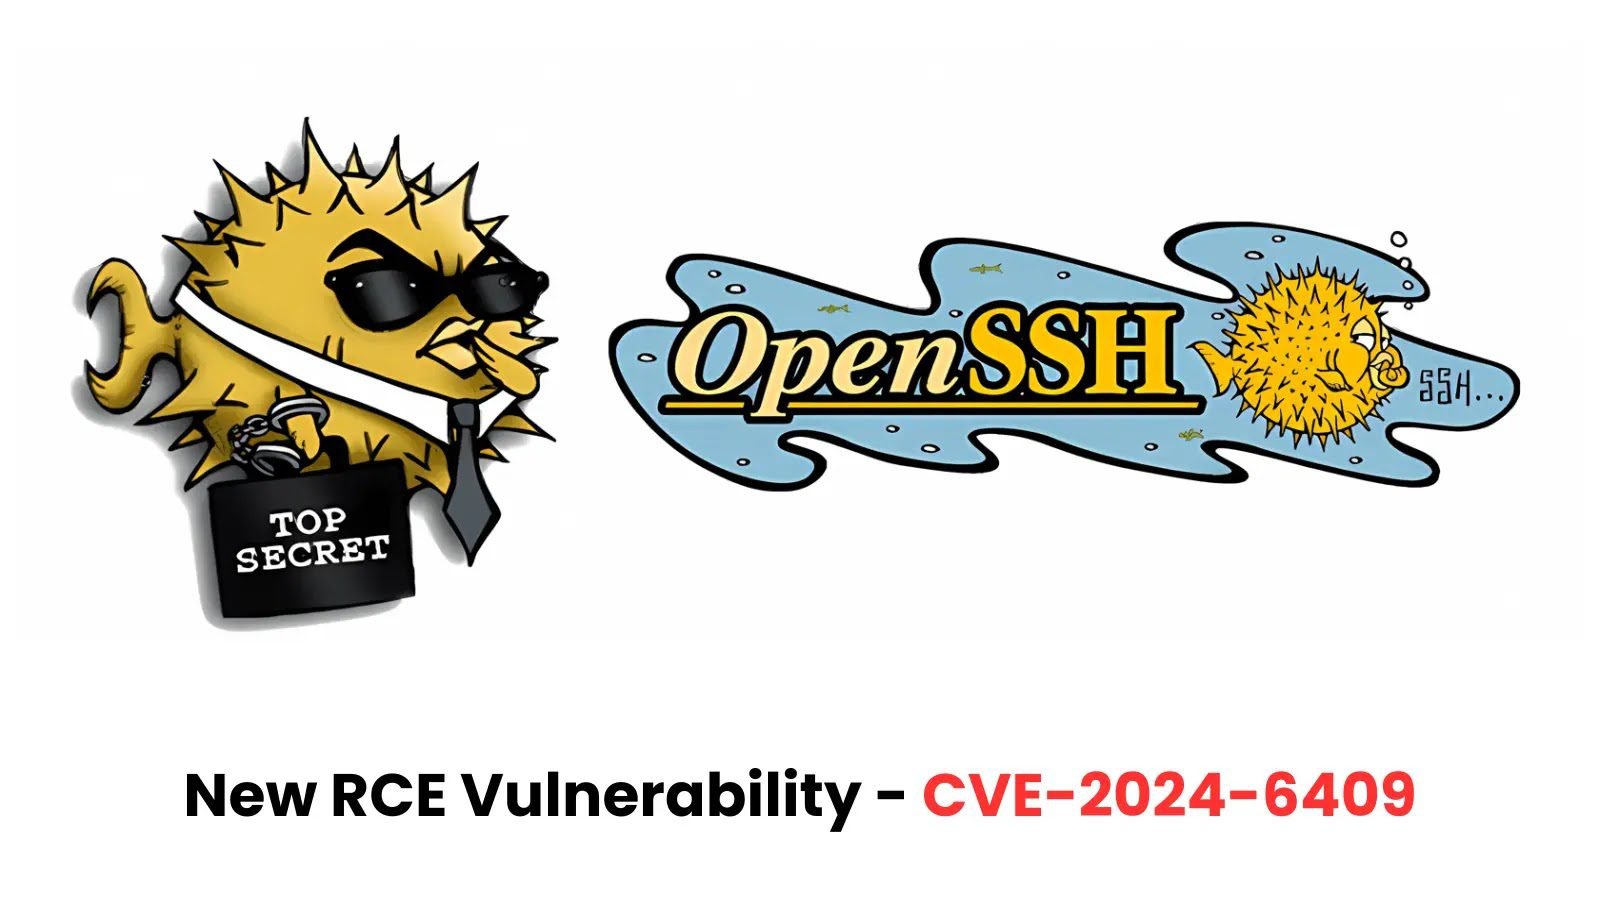 New OpenSSH Vulnerability CVE-2024-6409 Exposes Systems to RCE Attack